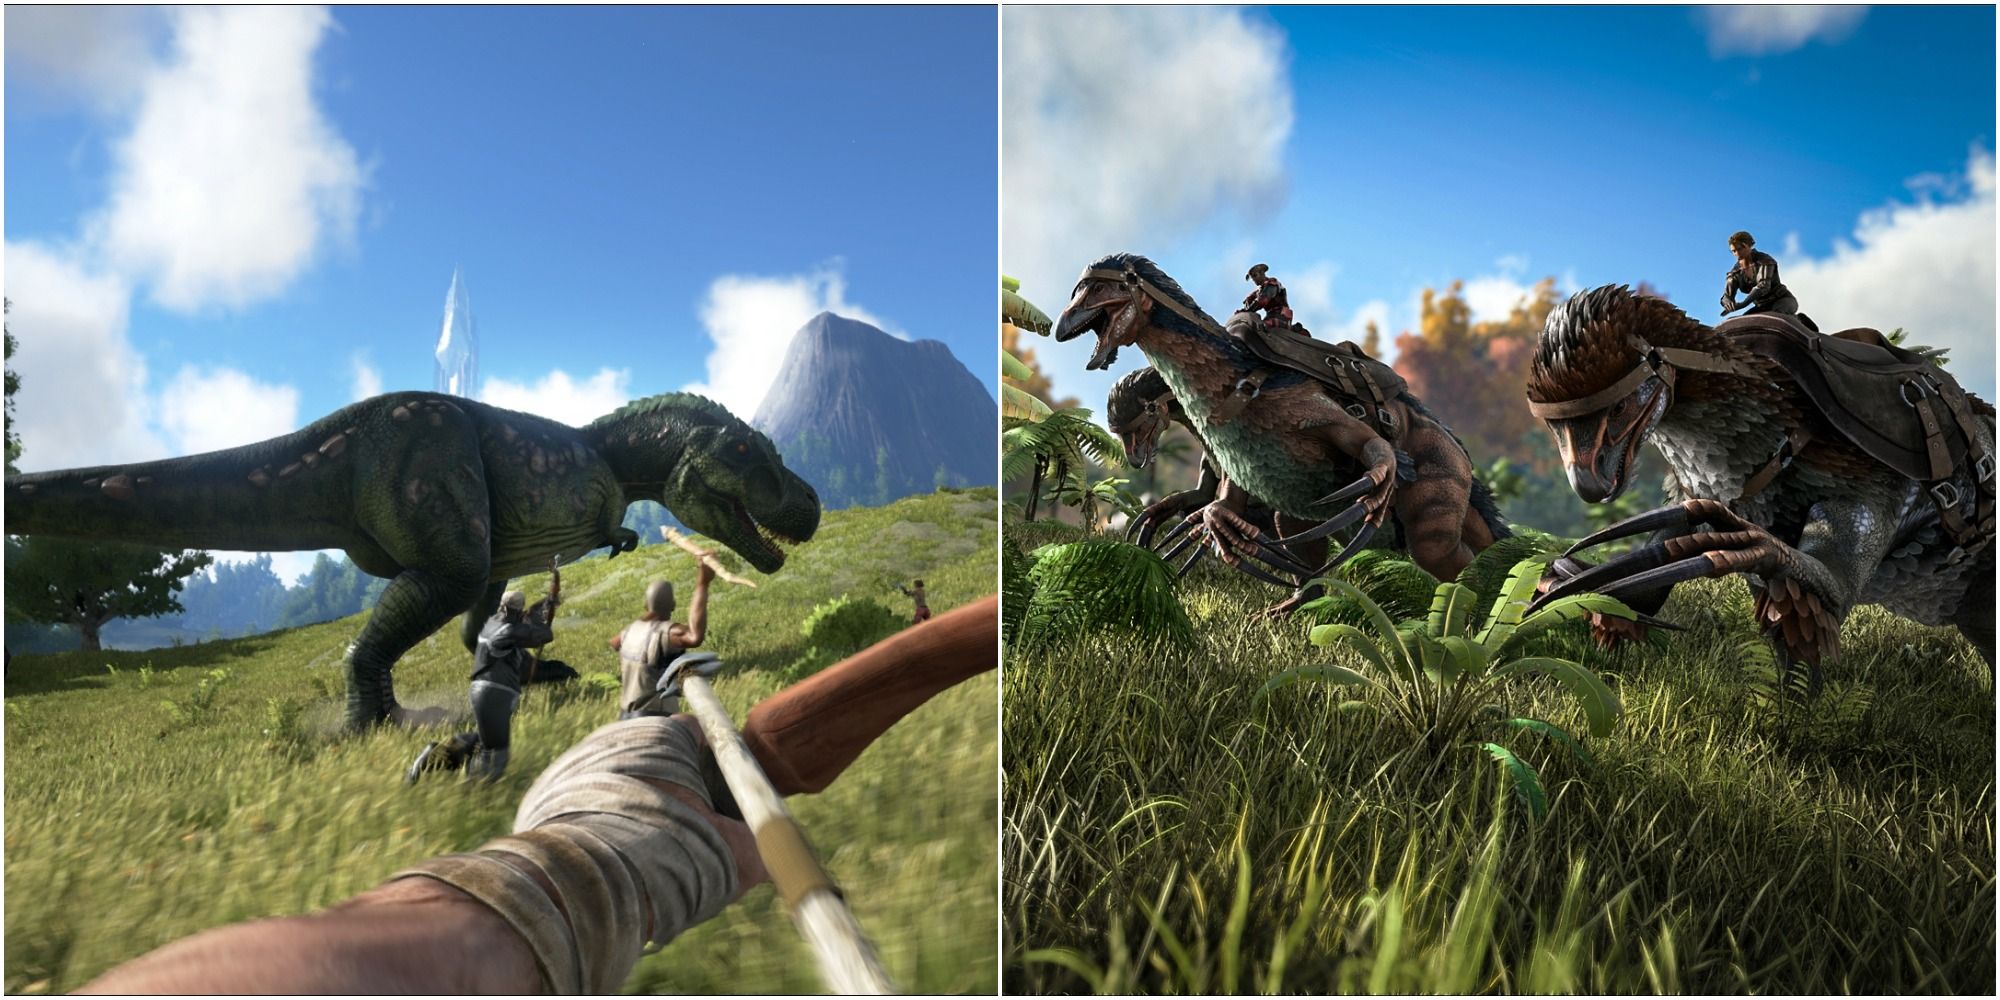 A collage showing scenes from Ark: Survival Evolved